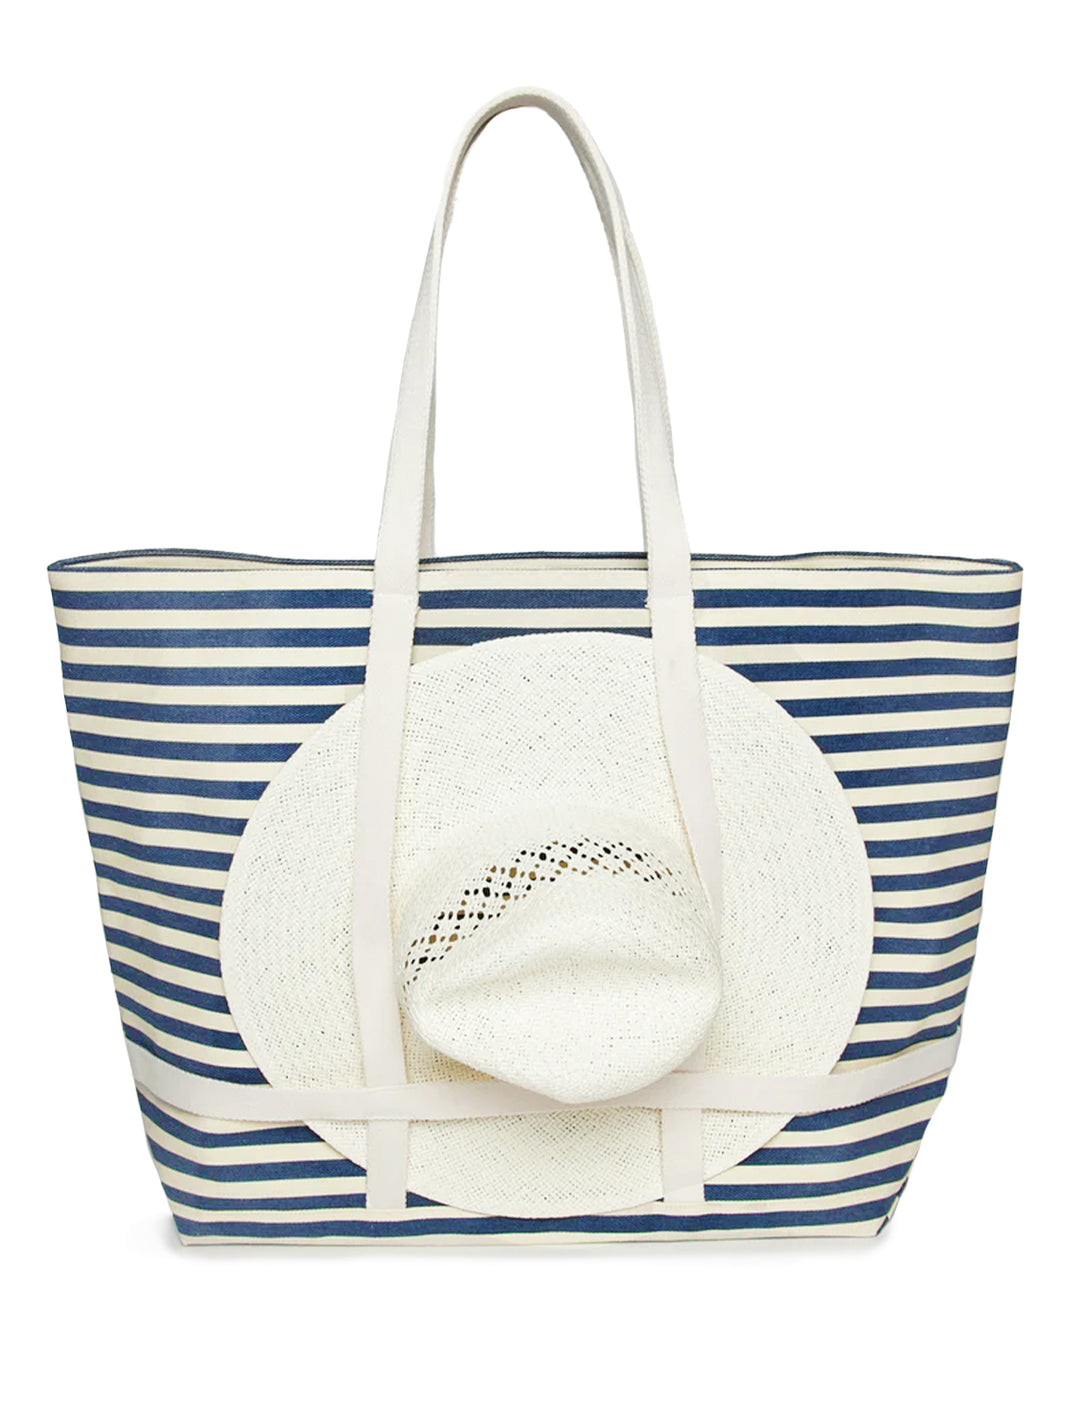 Front view of Hat Attack's sunhat sized traveler tote in navy stripe, with a hat attached.